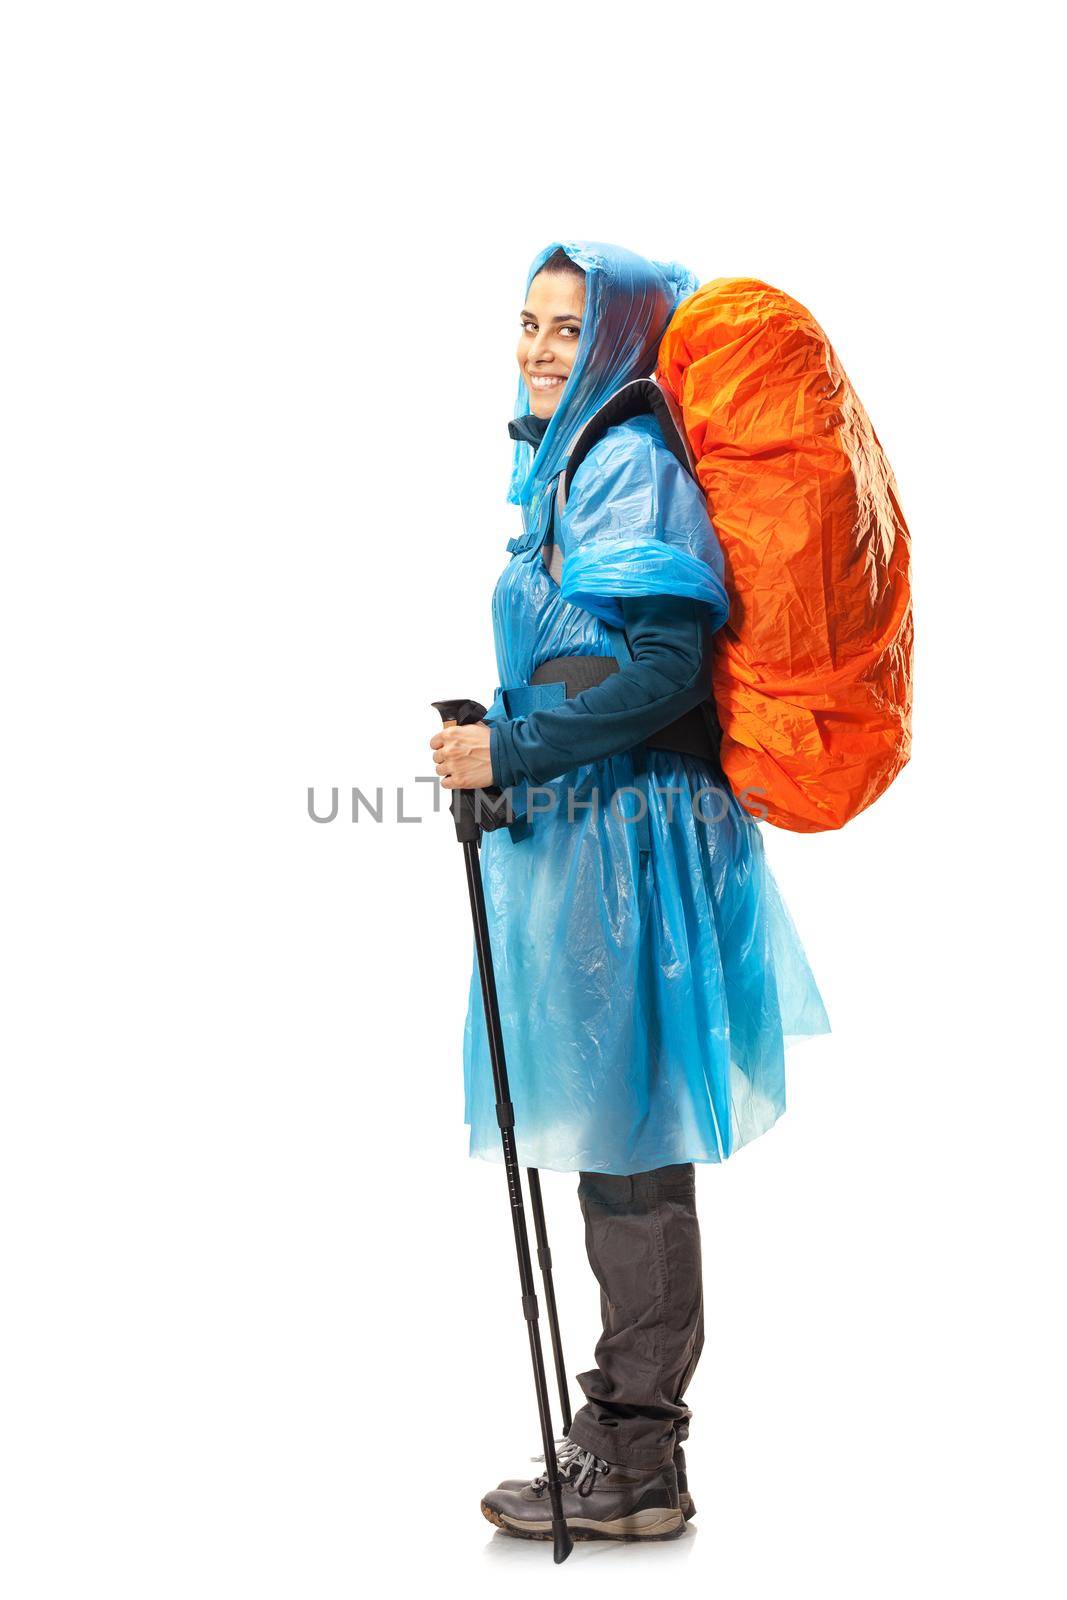 girl with hiking equipment and large backpack, wearing blue raincoat, posing in studio isolated on white.